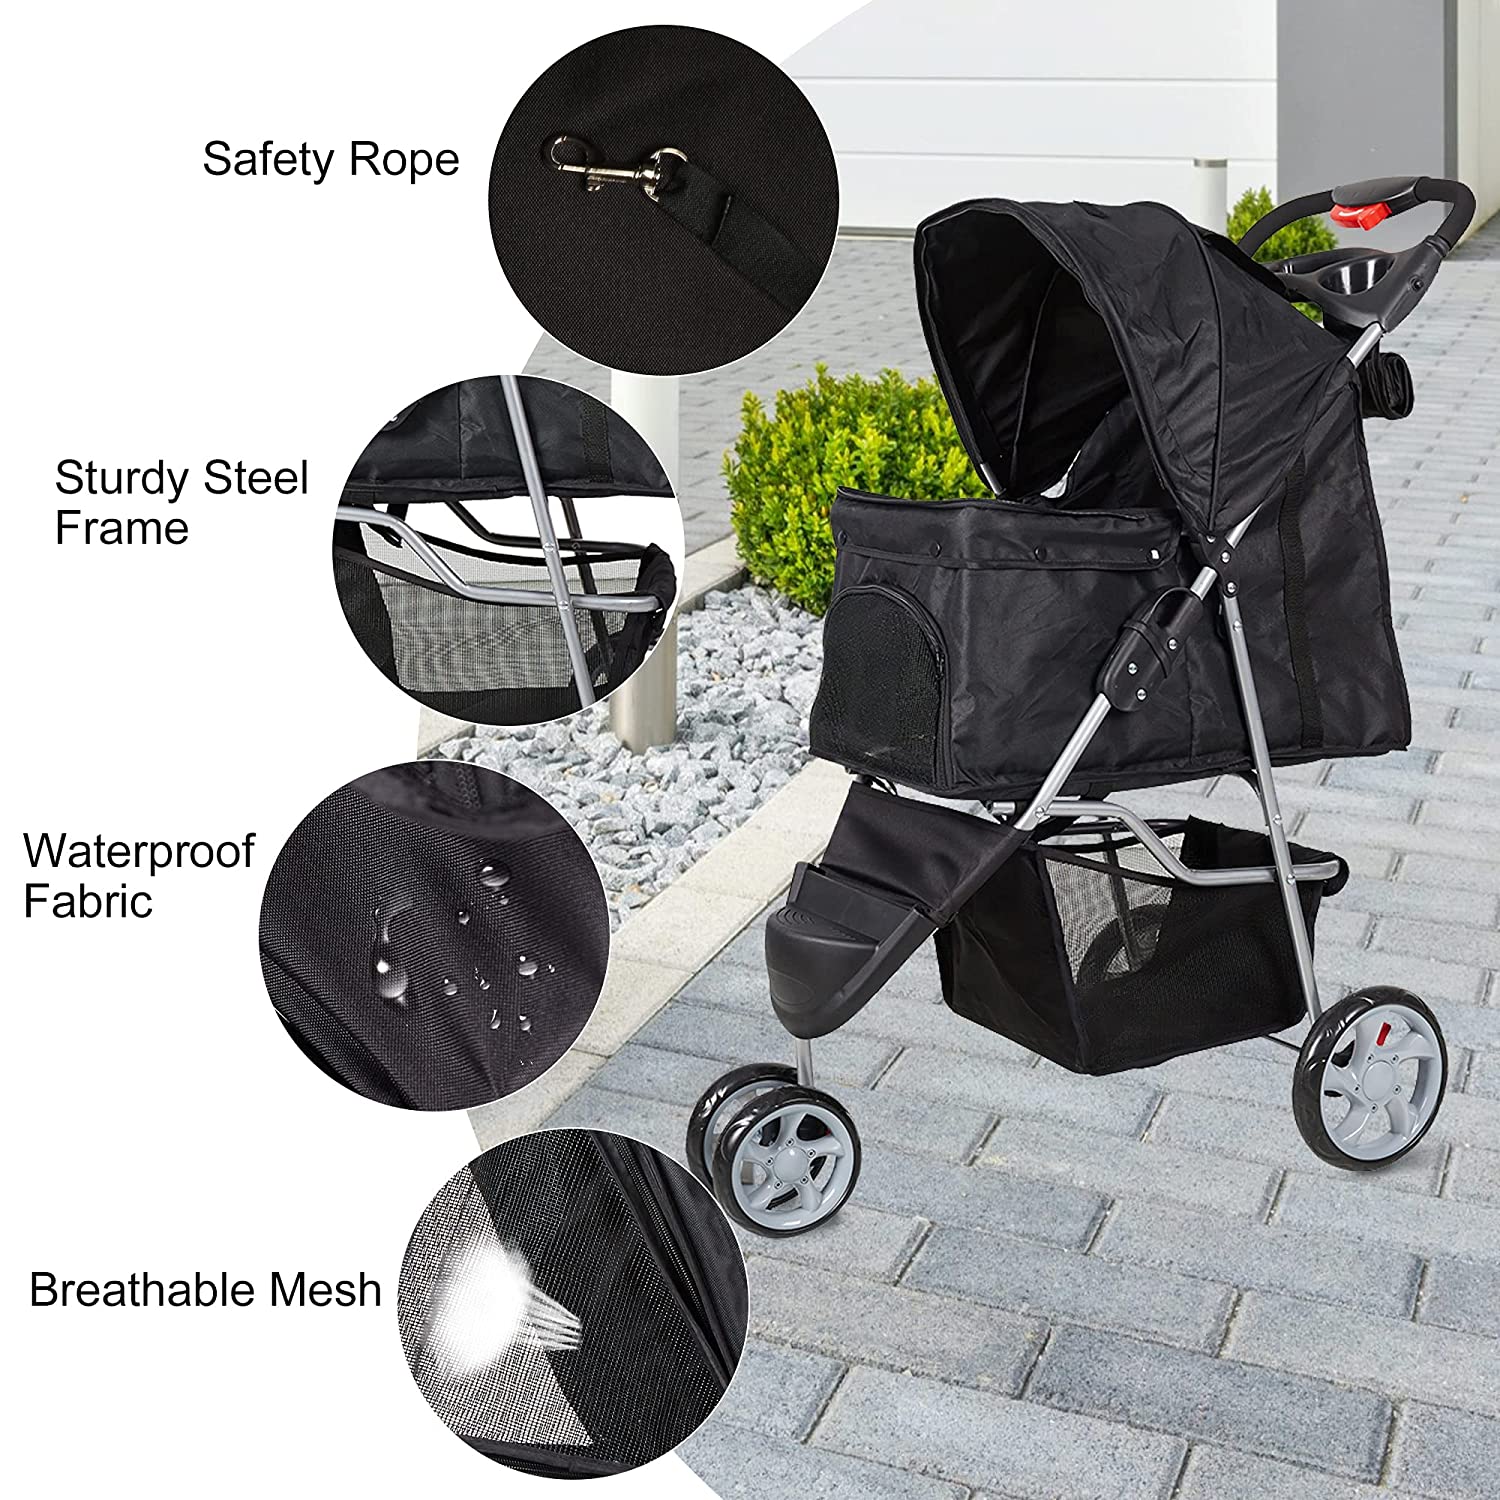 (Out of Stock) Pet Stroller for Dog Cat Small Animal Folding Walk Jogger Travel Carrier Cart with Three Wheels, Black